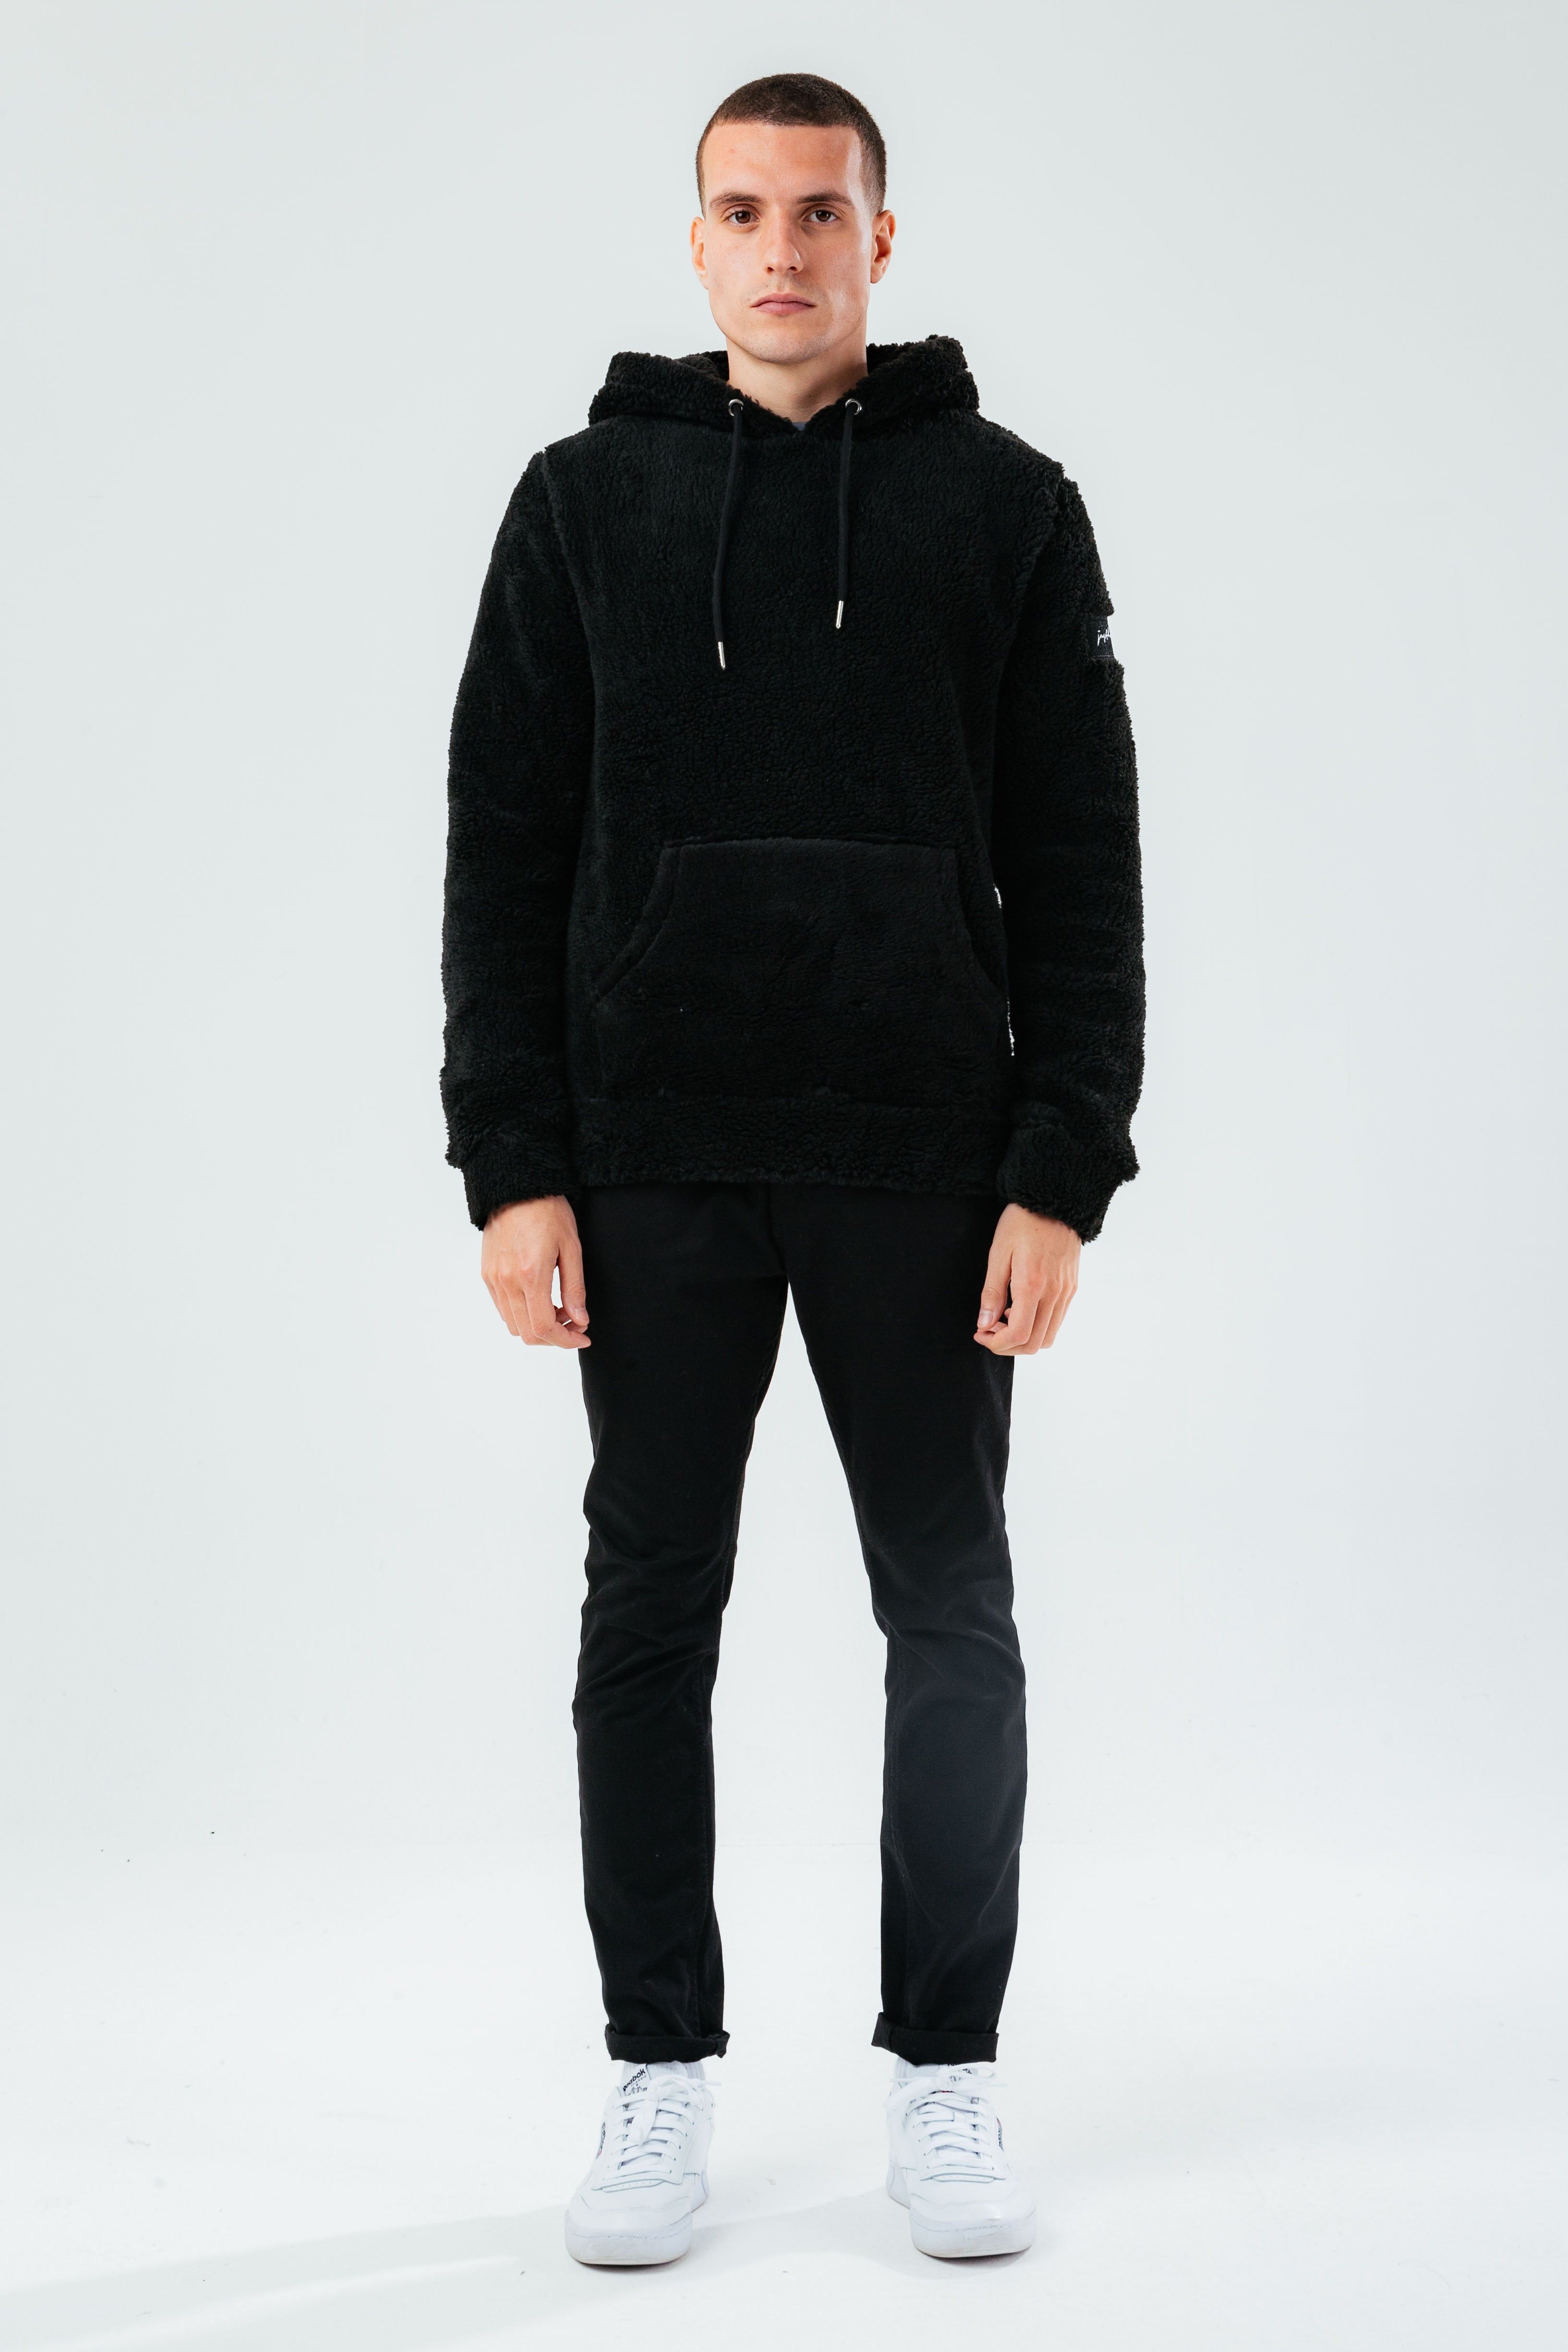 The HYPE. Men's Pullover Hoodie boasts a soft touch fabric base for supreme comfort. Designed in our standard men's pullover shape, with a fixed hood, kangaroo pocket, elasticated hem and ribbed cuffs. The model wears a size M. If you like an oversized fit, go up a size, if you like a tight fit go down a size, for a standard fit, select your usual size. Machine wash at 30 degrees.